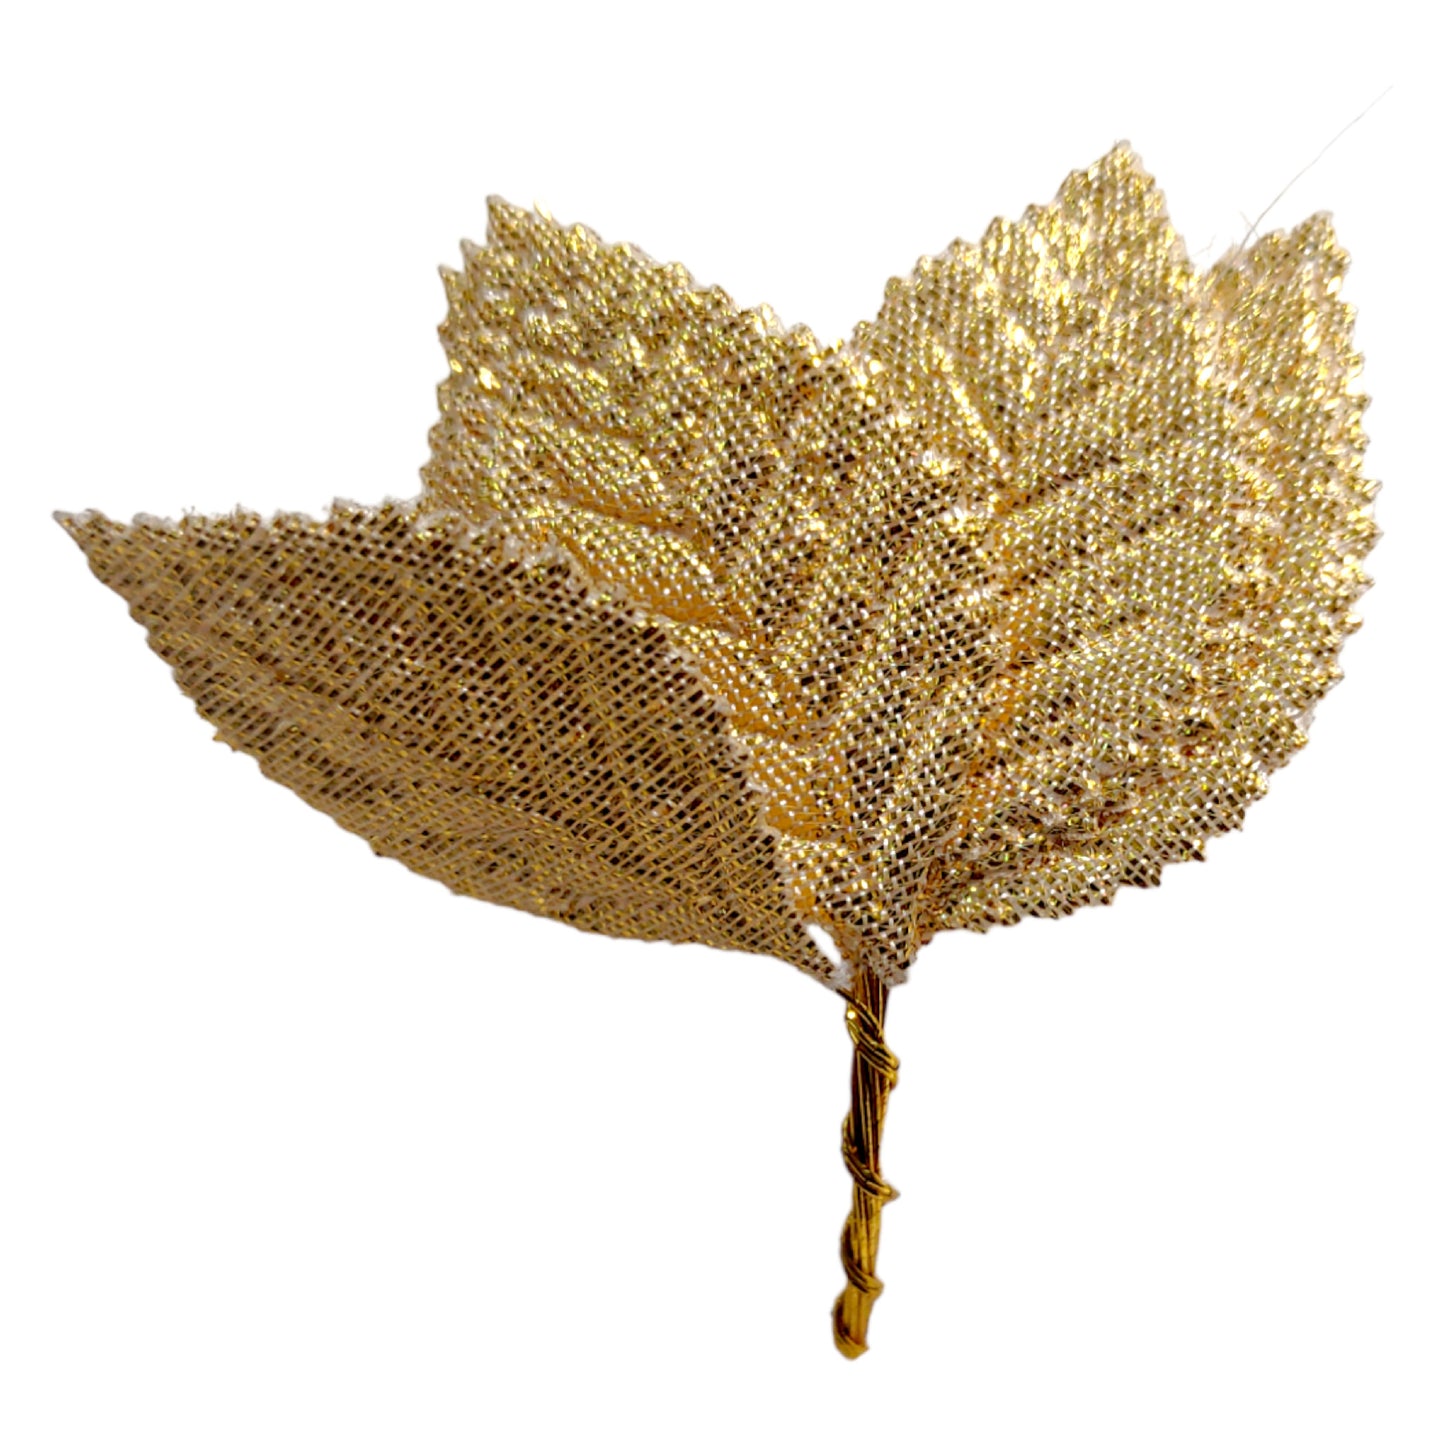 Decorative Artificial Fabric Leafs for Decoration Craft or Taxtile